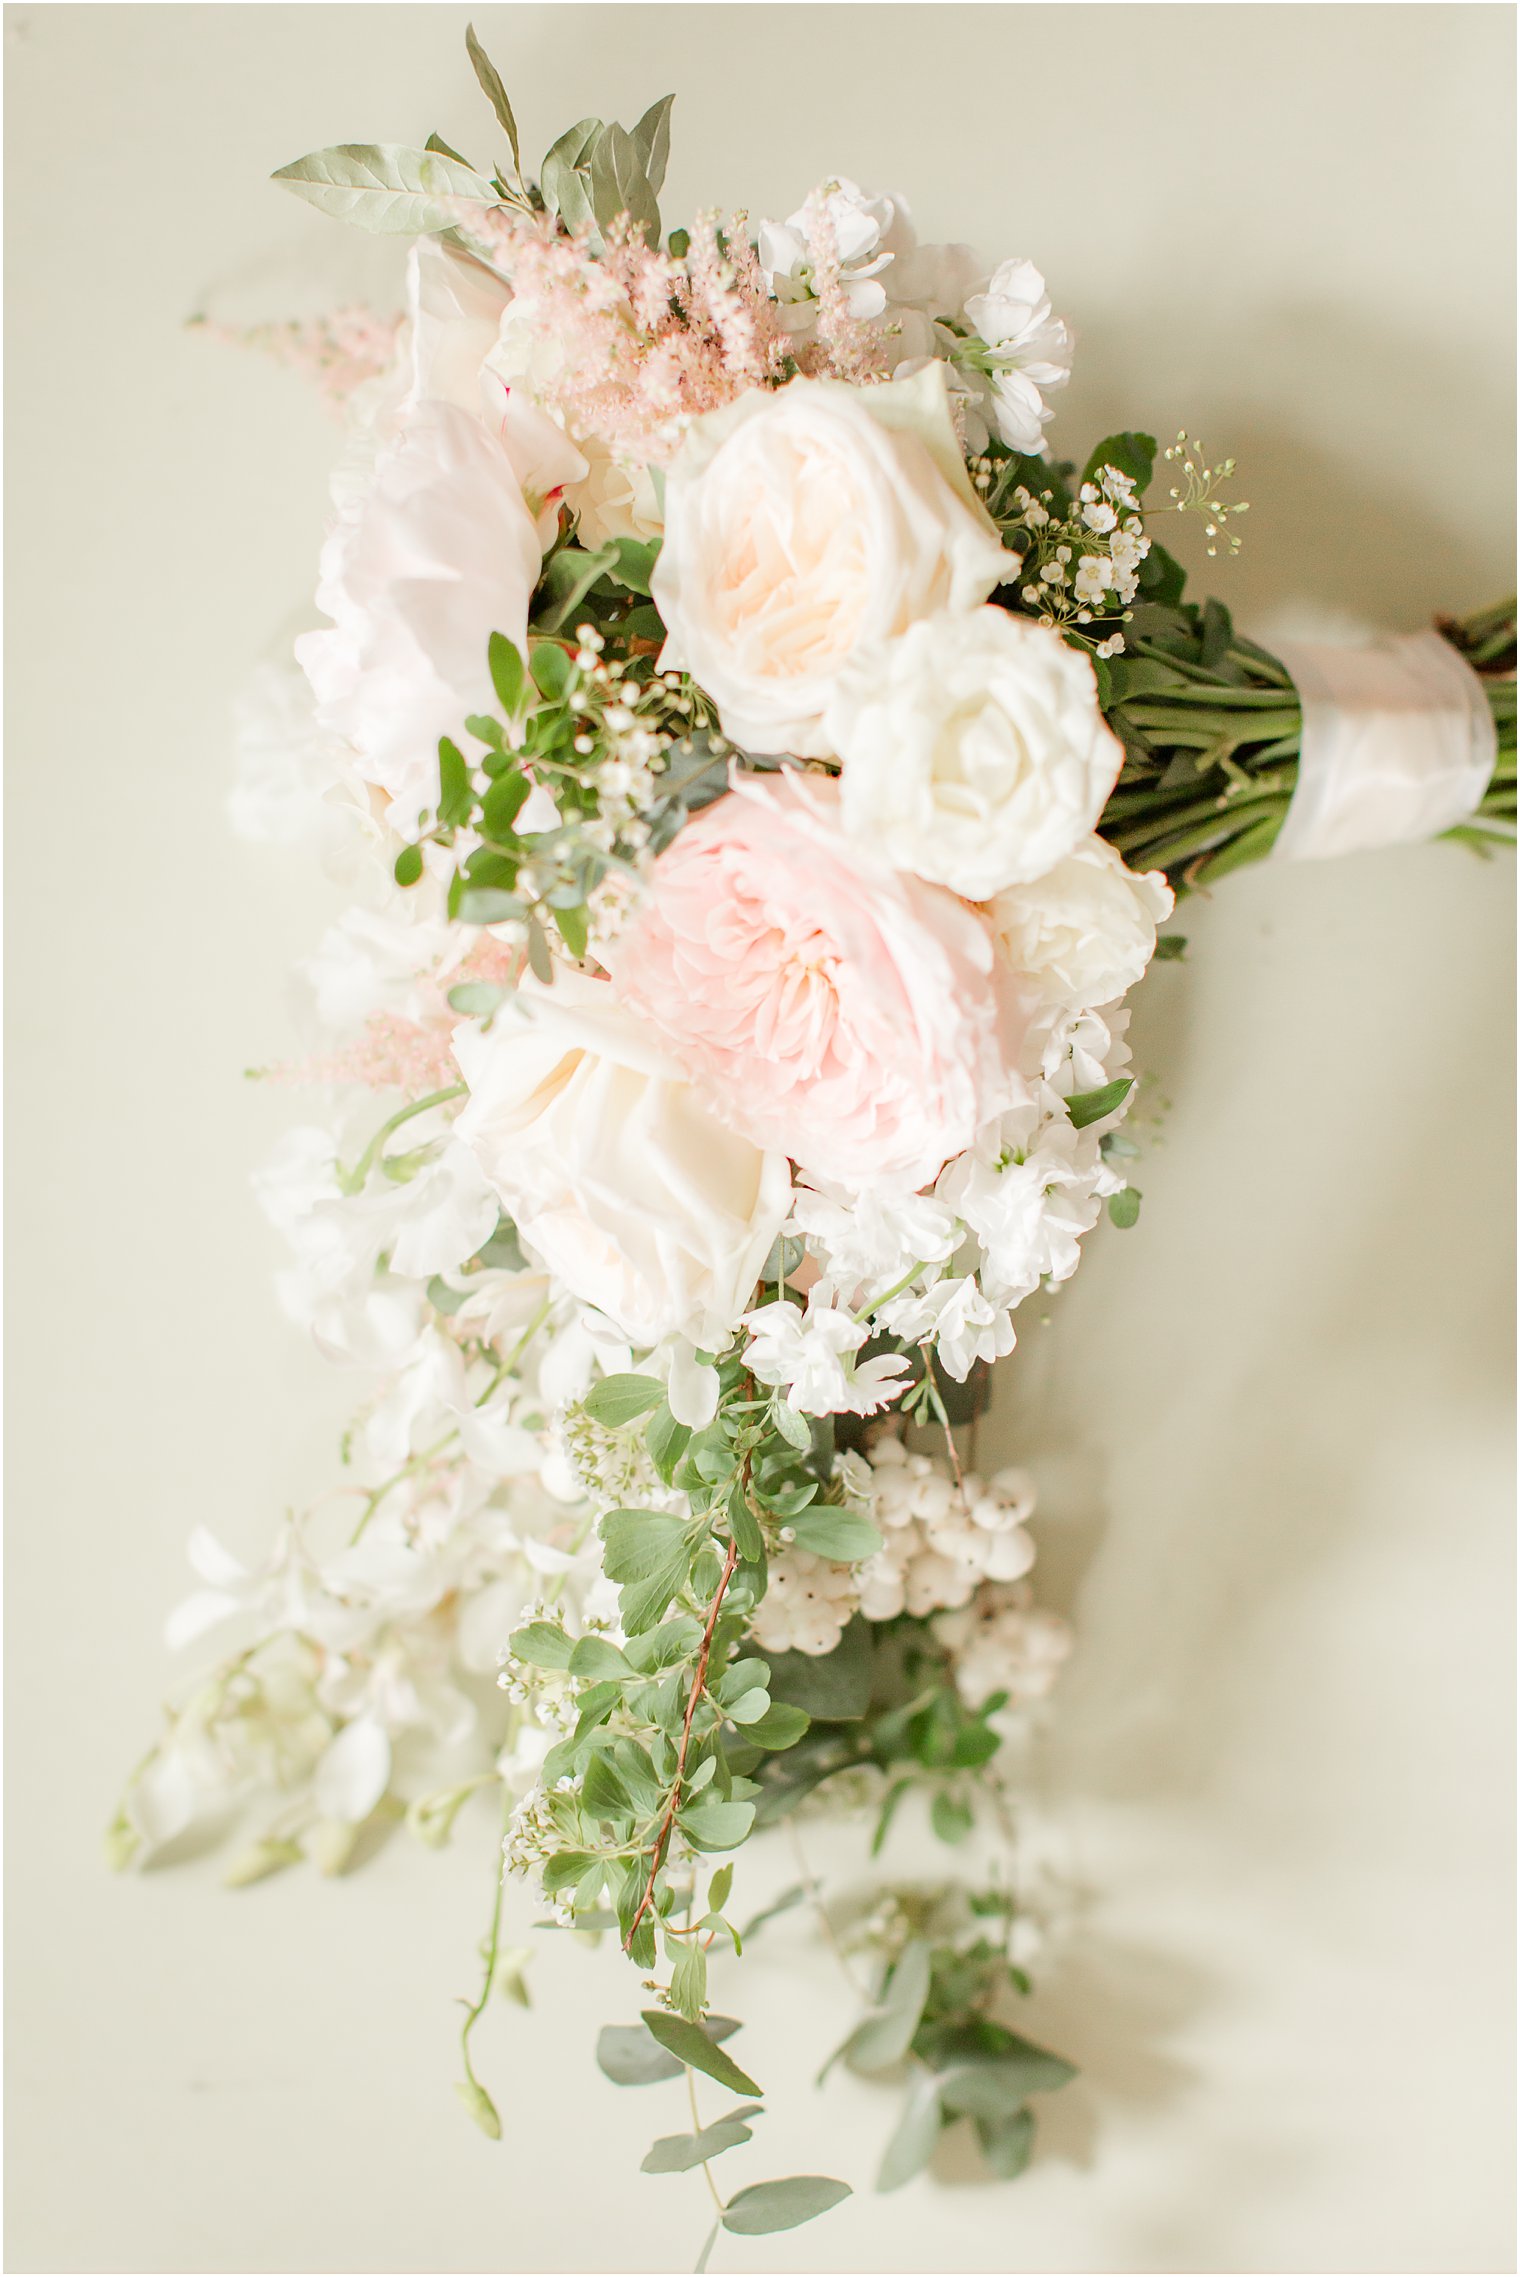 Bridal bouquet by Twisted Willow Flowers